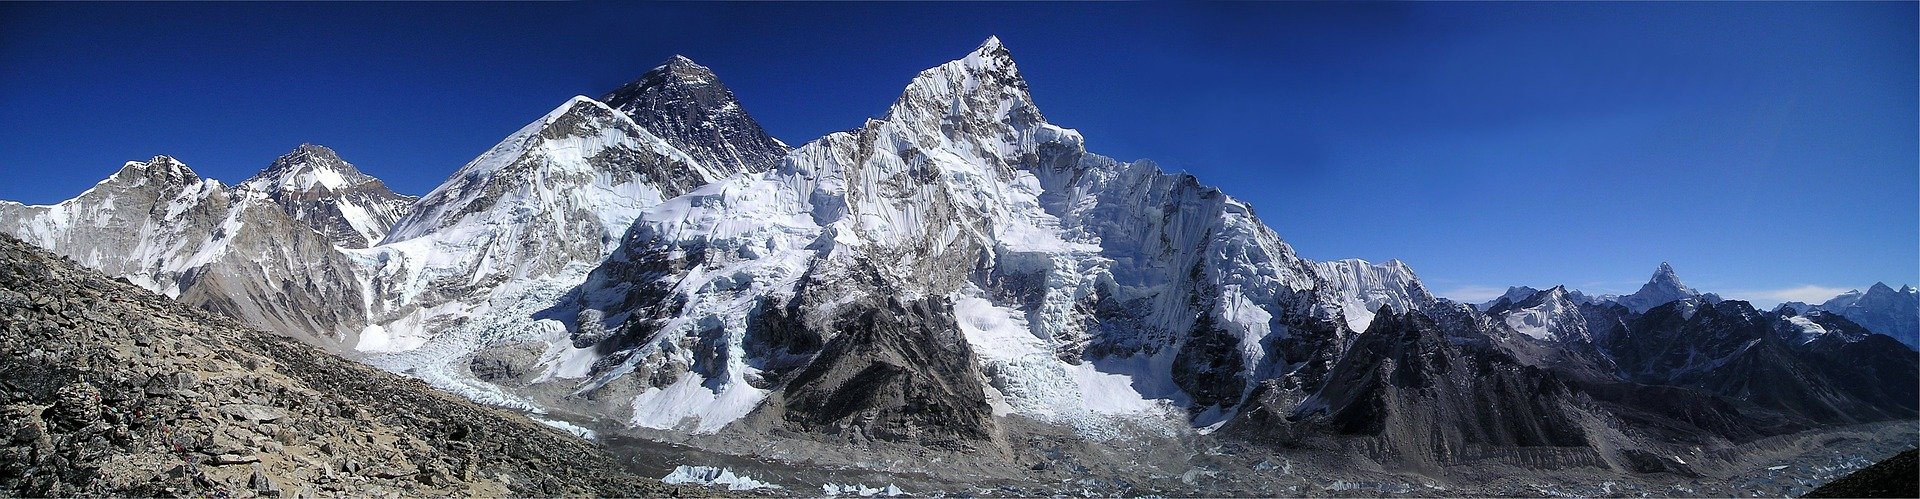 The highest mountain on earth: Mount Everest